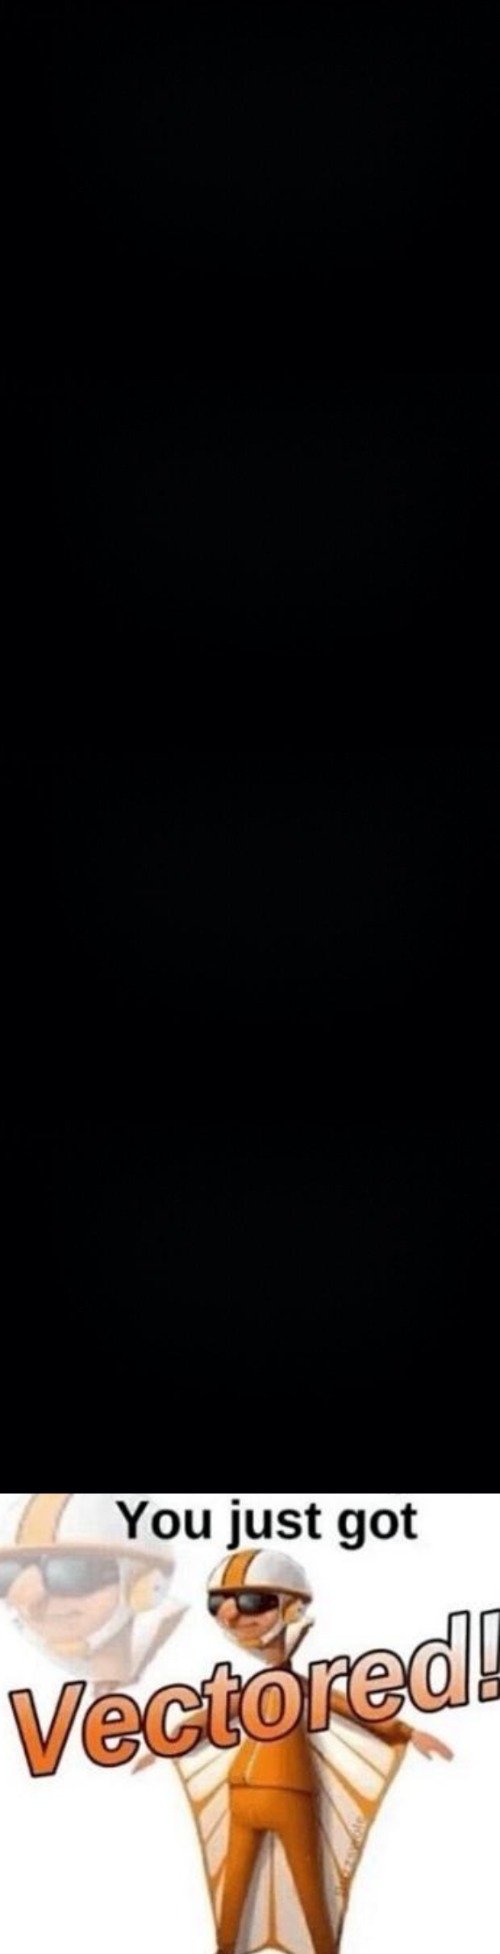 Black backround | image tagged in black background,you just got vectored | made w/ Imgflip meme maker